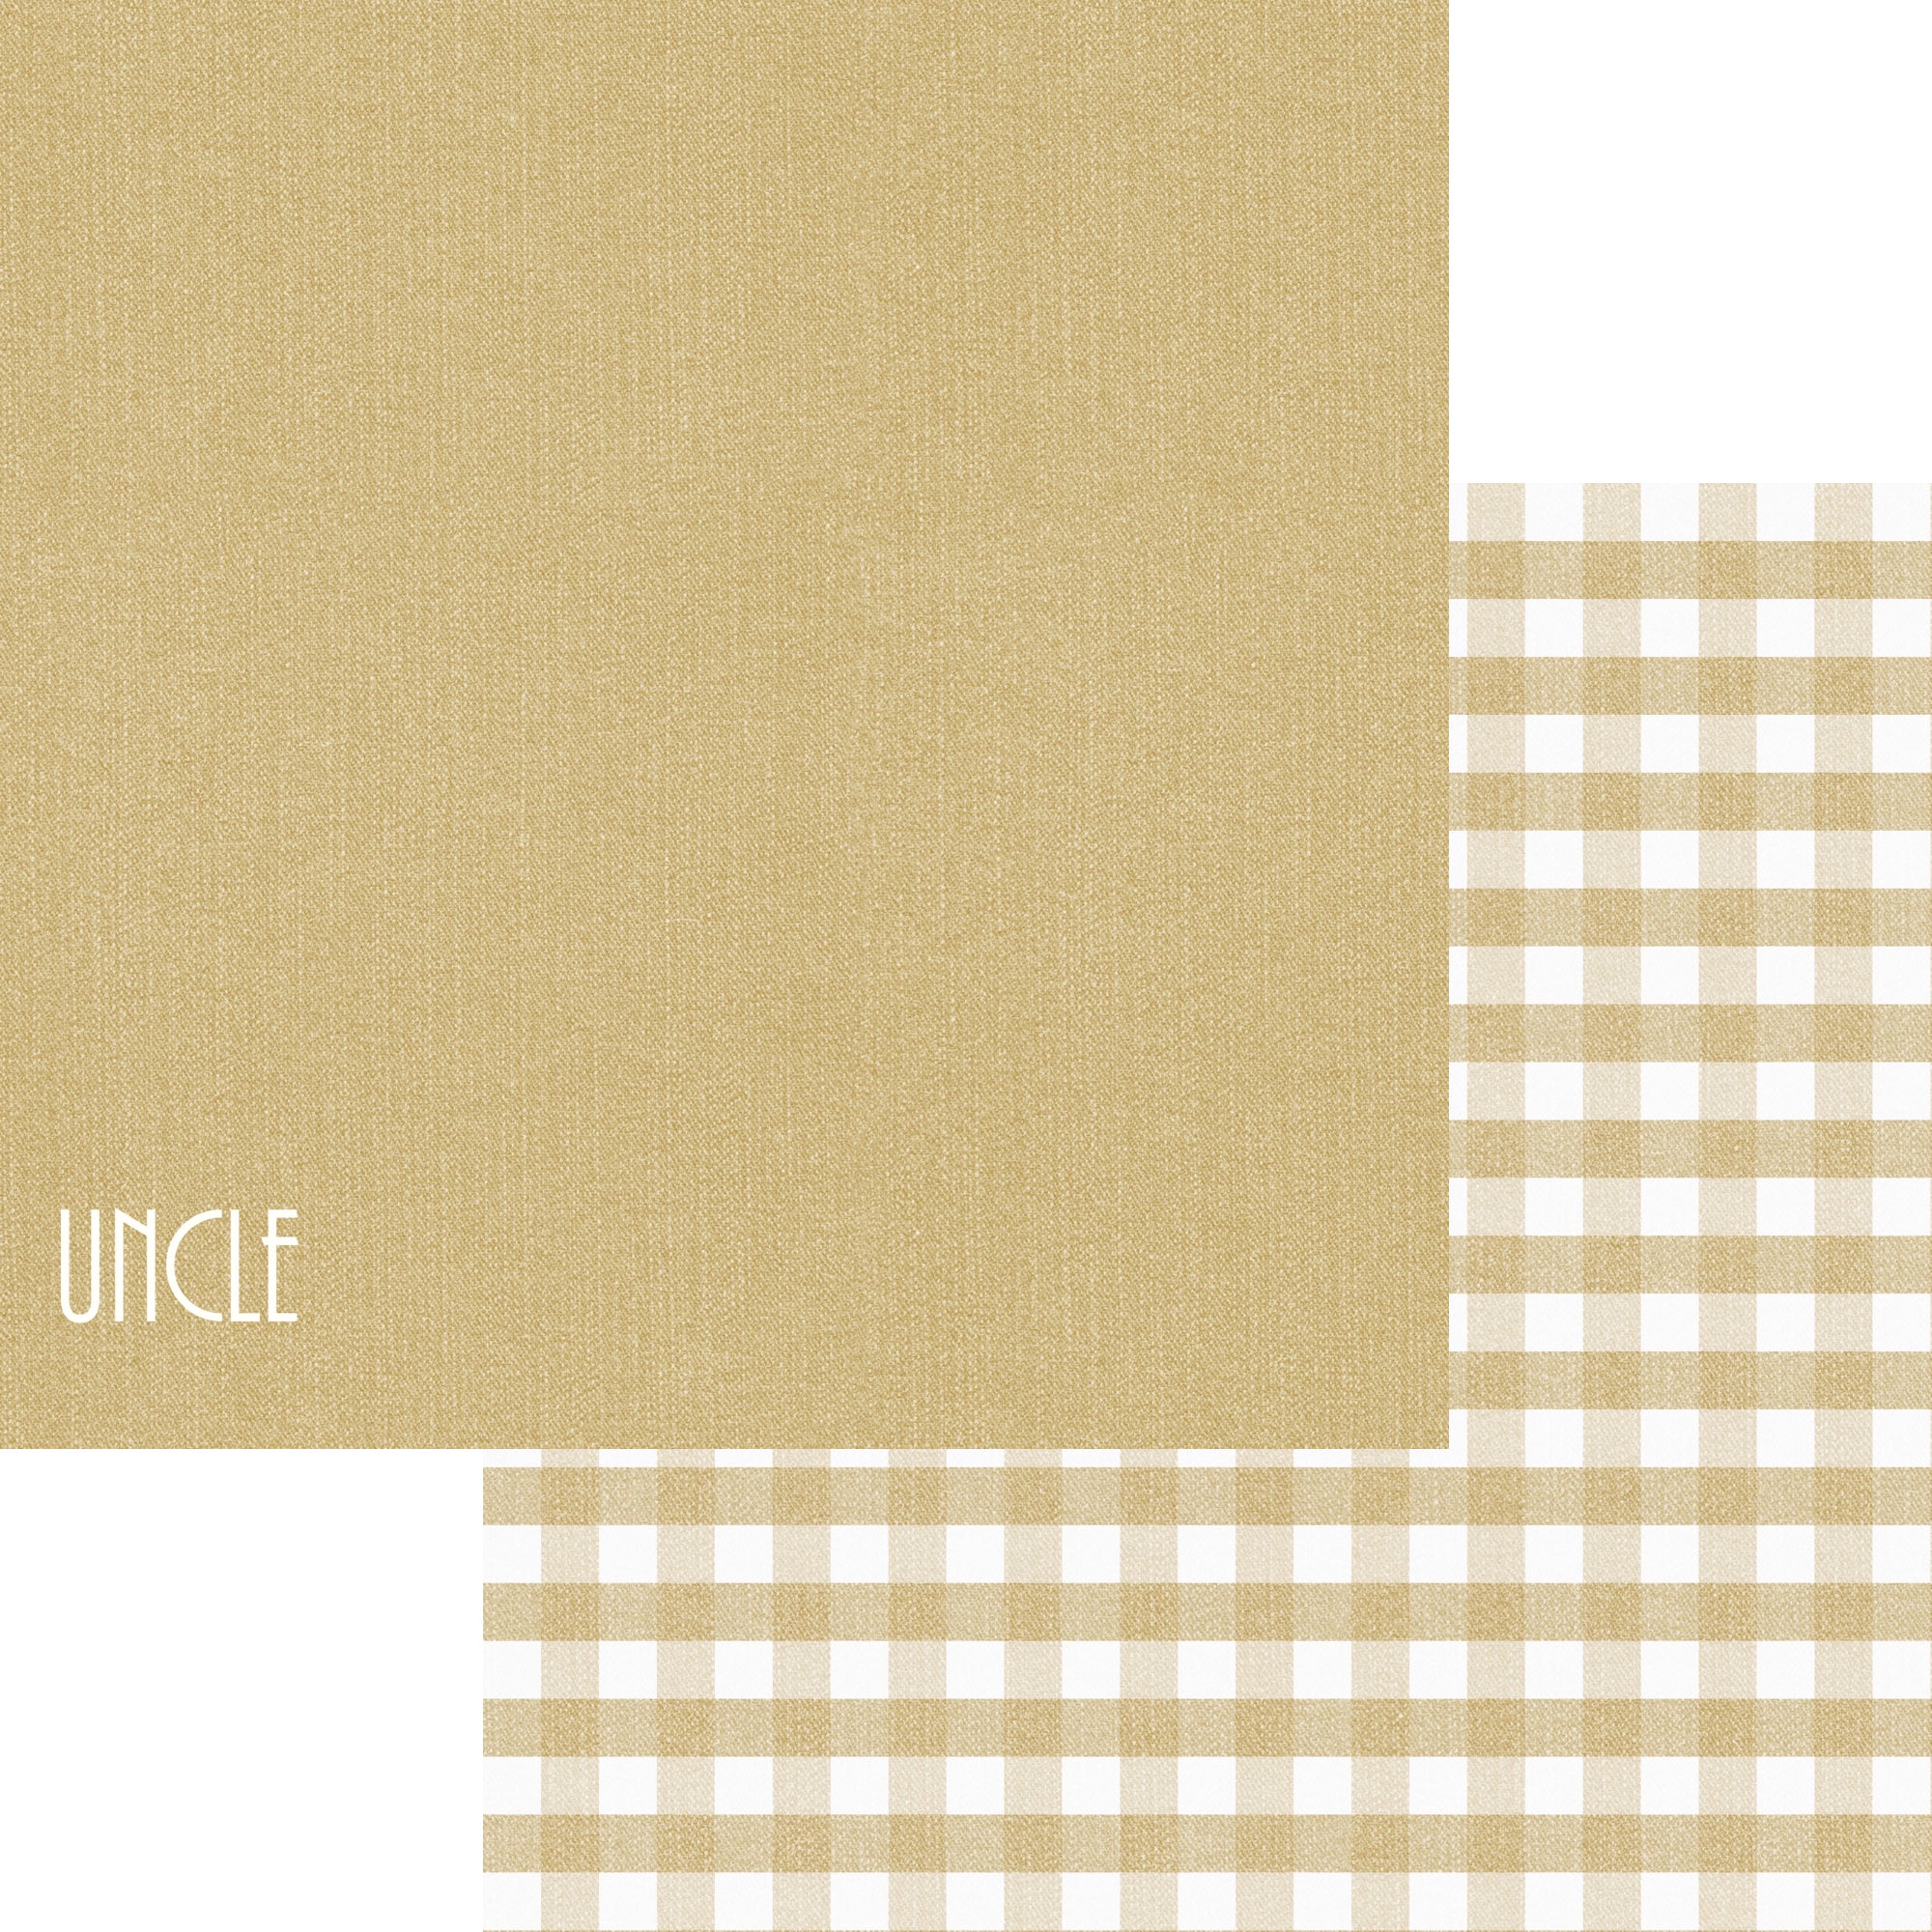 Family Collection Uncle 12 x 12 Double-Sided Scrapbook Paper by SSC Designs